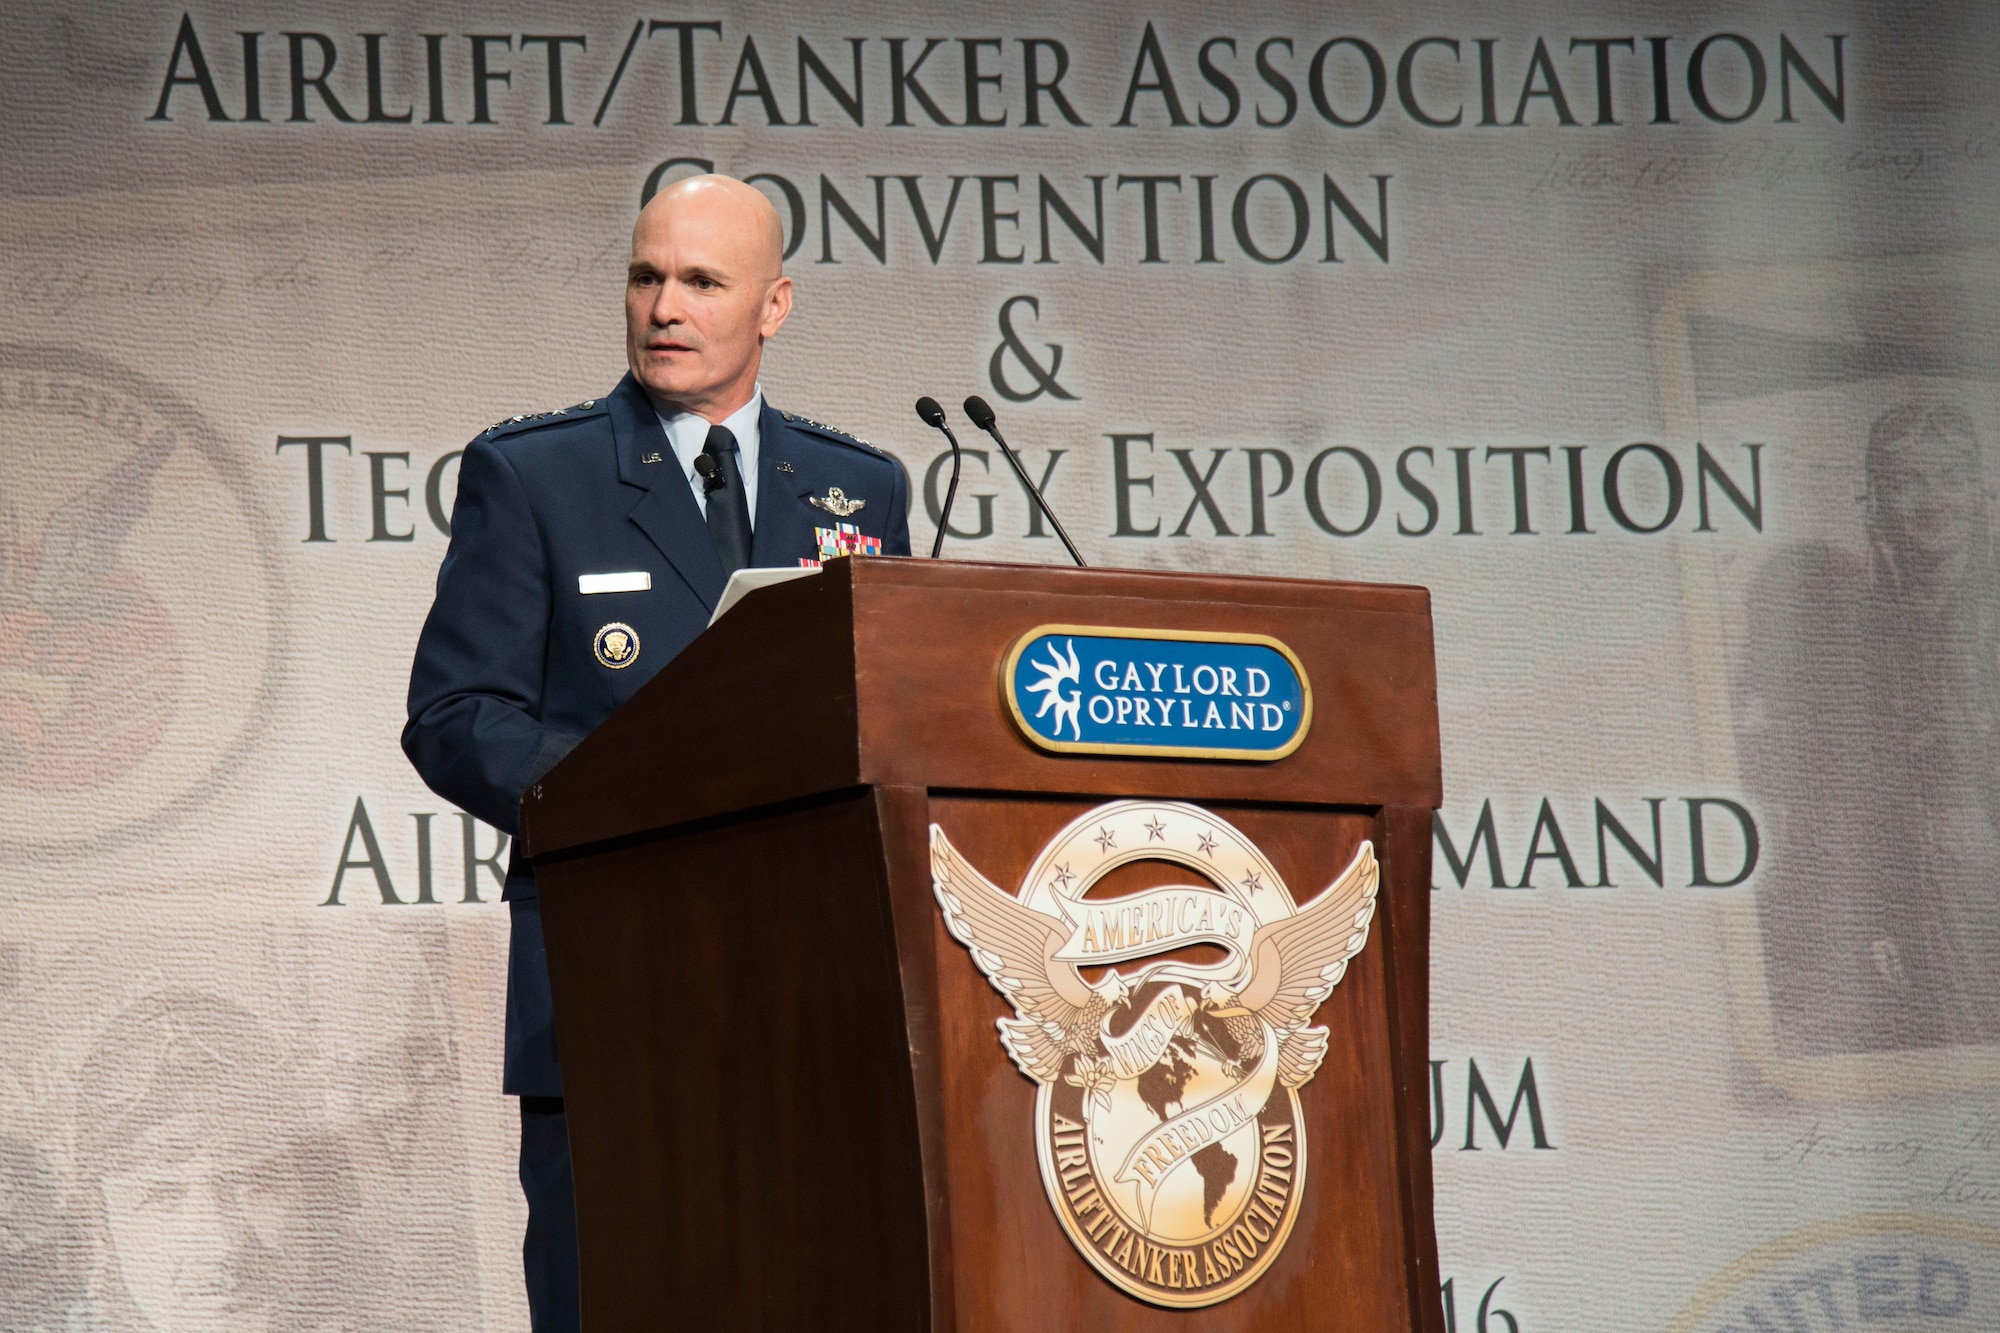 Gen. Carlton D. Everhart II, Air Mobility Command commander, discusses the impact mobility airmen can have on enhancing the future of Rapid Global Mobility, during his keynote speech at the 48th Air Mobility Command and Airlift/Tanker Association Symposium in Nashville, Tennessee, Oct. 29, 2016. The symposium served as a key professional development forum for Mobility Air Forces Airmen by enabling direct access to senior mobility leaders.  (U.S. Air Force photo by Senior Airman Megan Friedl) 